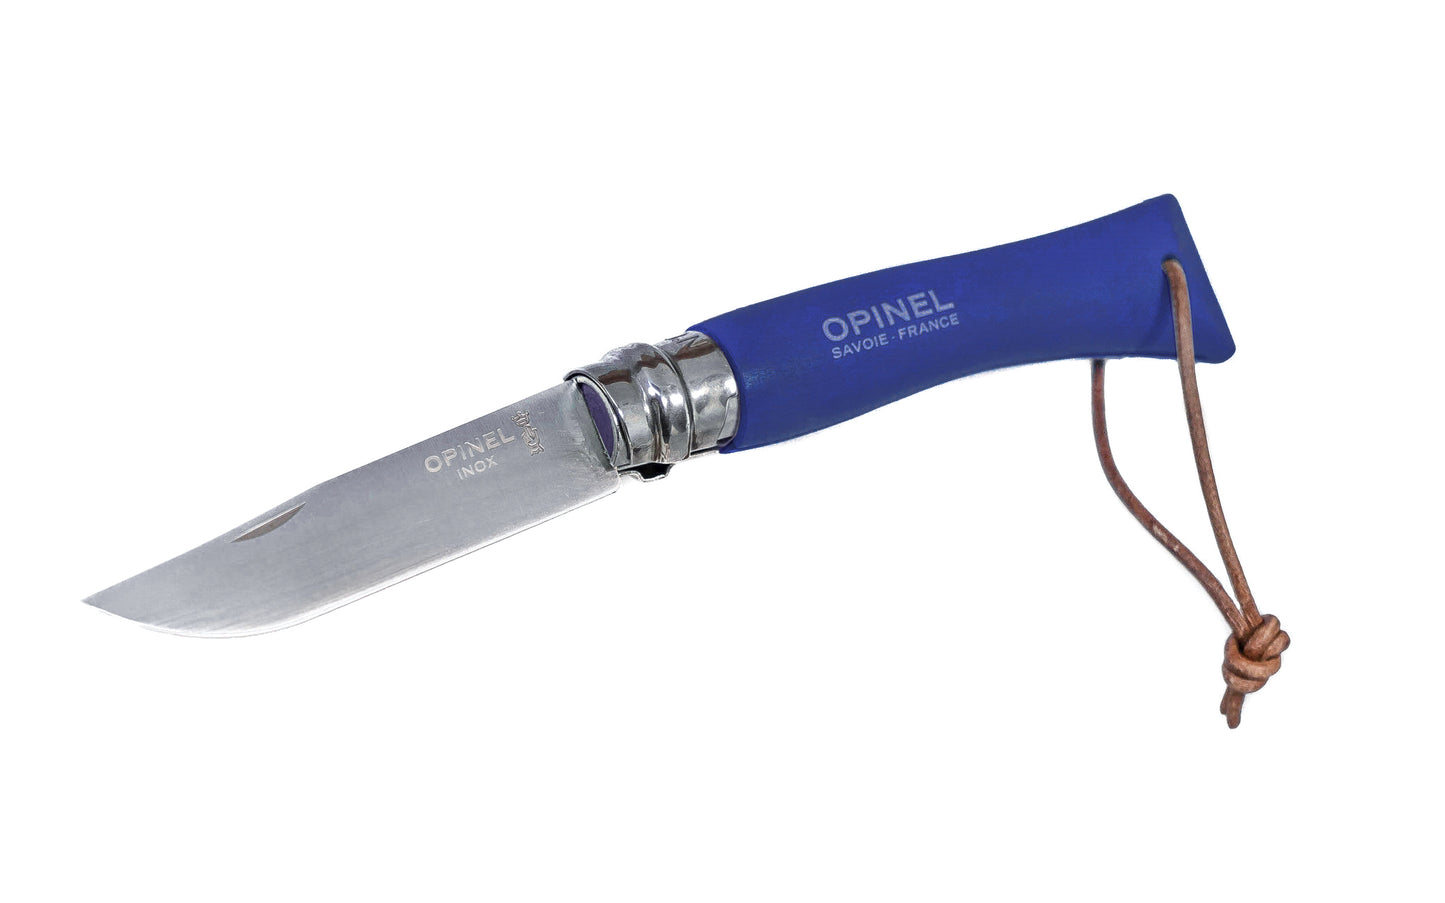 Made in France · Opinel Stainless Steel No. 8 Knife - Navy Color with a 3-1/4" long foldable blade with stainless locking collar ~ Made of 12c27 Sandvik stainless steel ~ Painted navy blue Beechwood handle with leather loop. "The adventurer" colorama blue pocket knife.